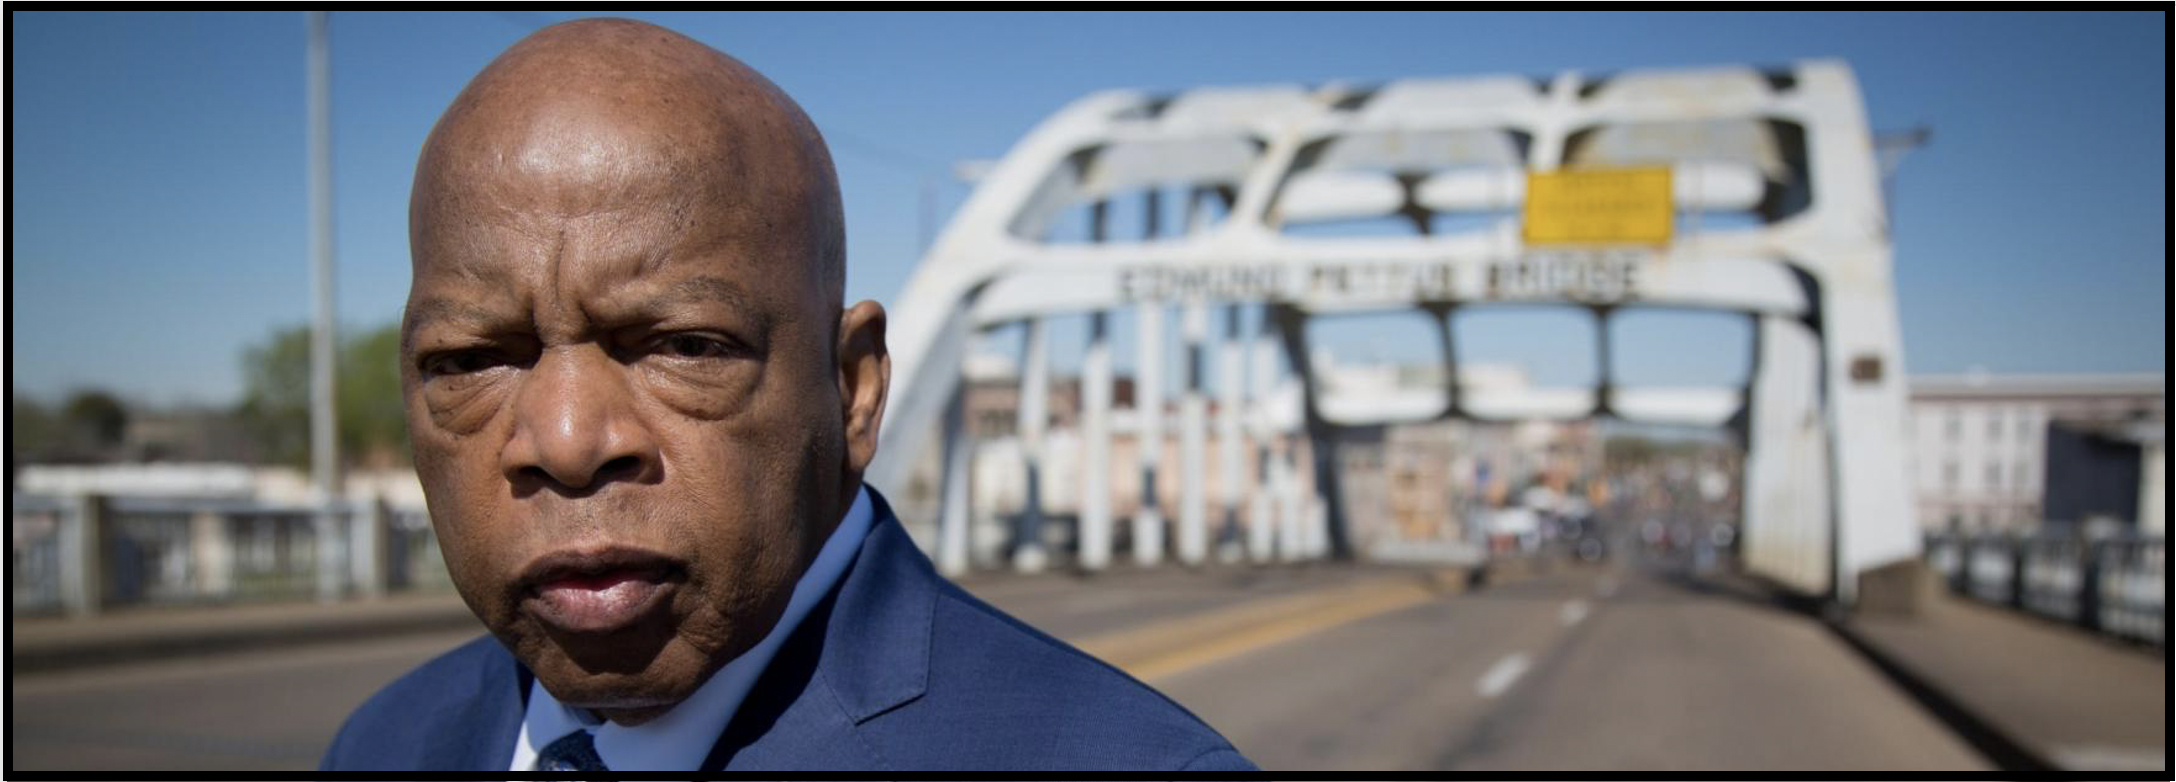 John Lewis was a proud advocate for voting rights throughout his life.